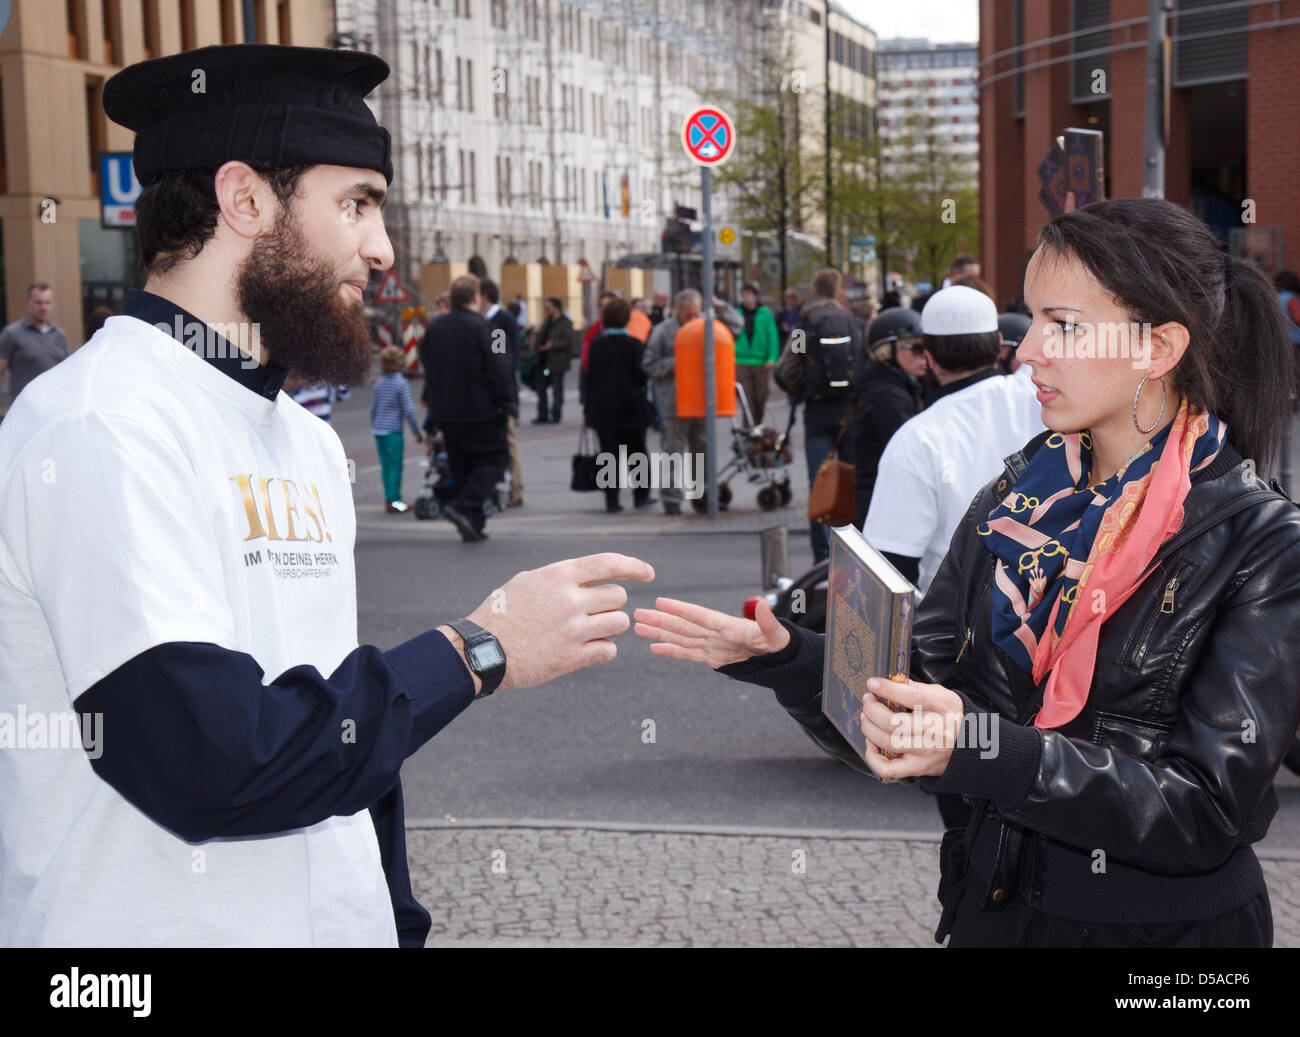 Berlin, Germany, the man reaches over a passer Quran and discussed with her Stock Photo